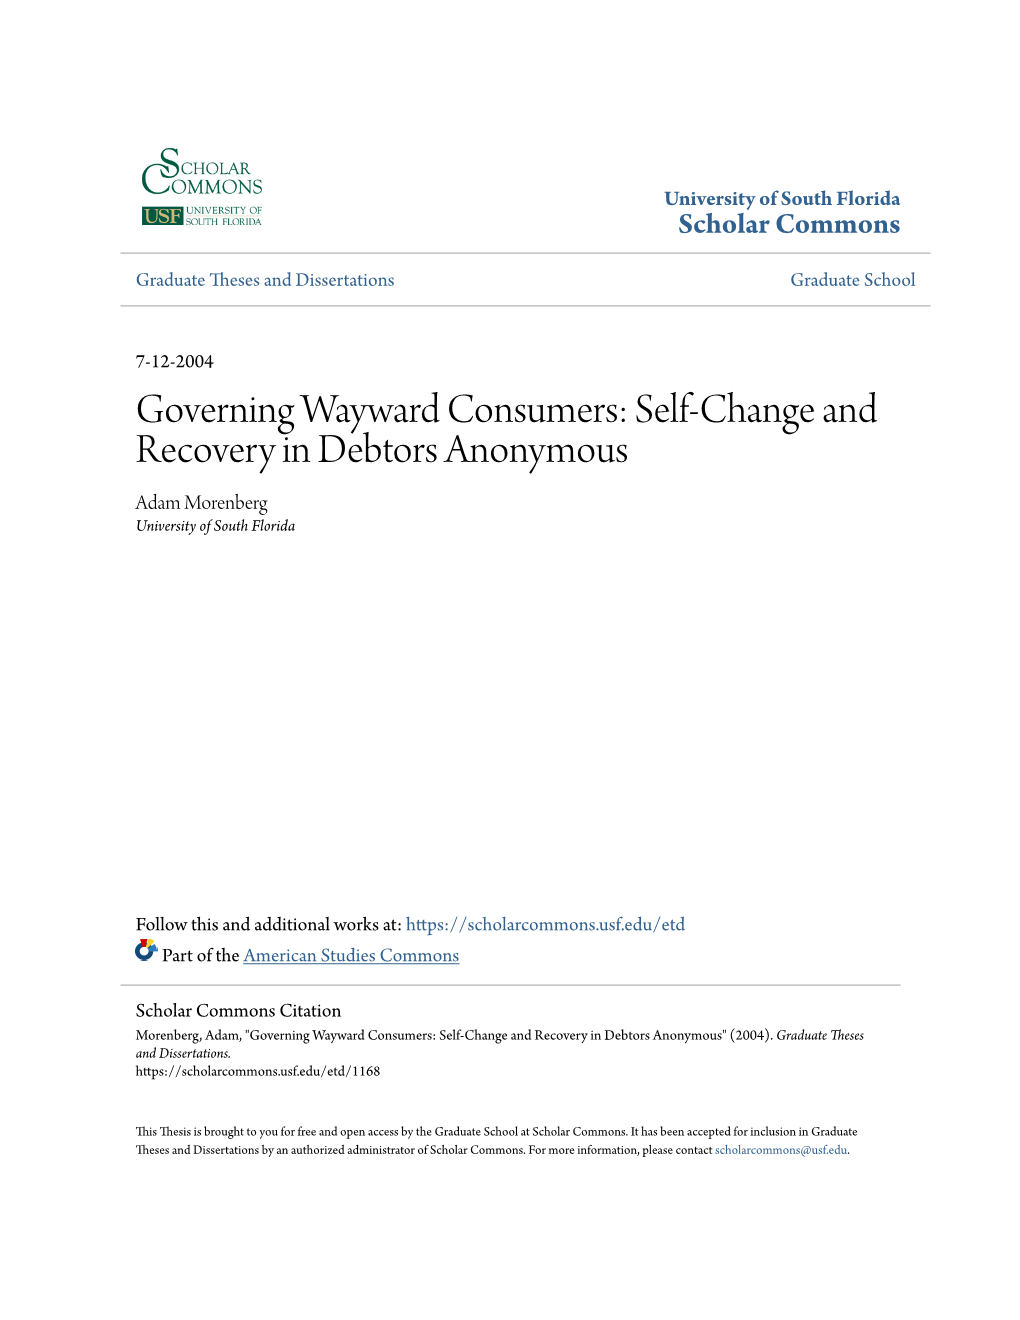 Self-Change and Recovery in Debtors Anonymous Adam Morenberg University of South Florida